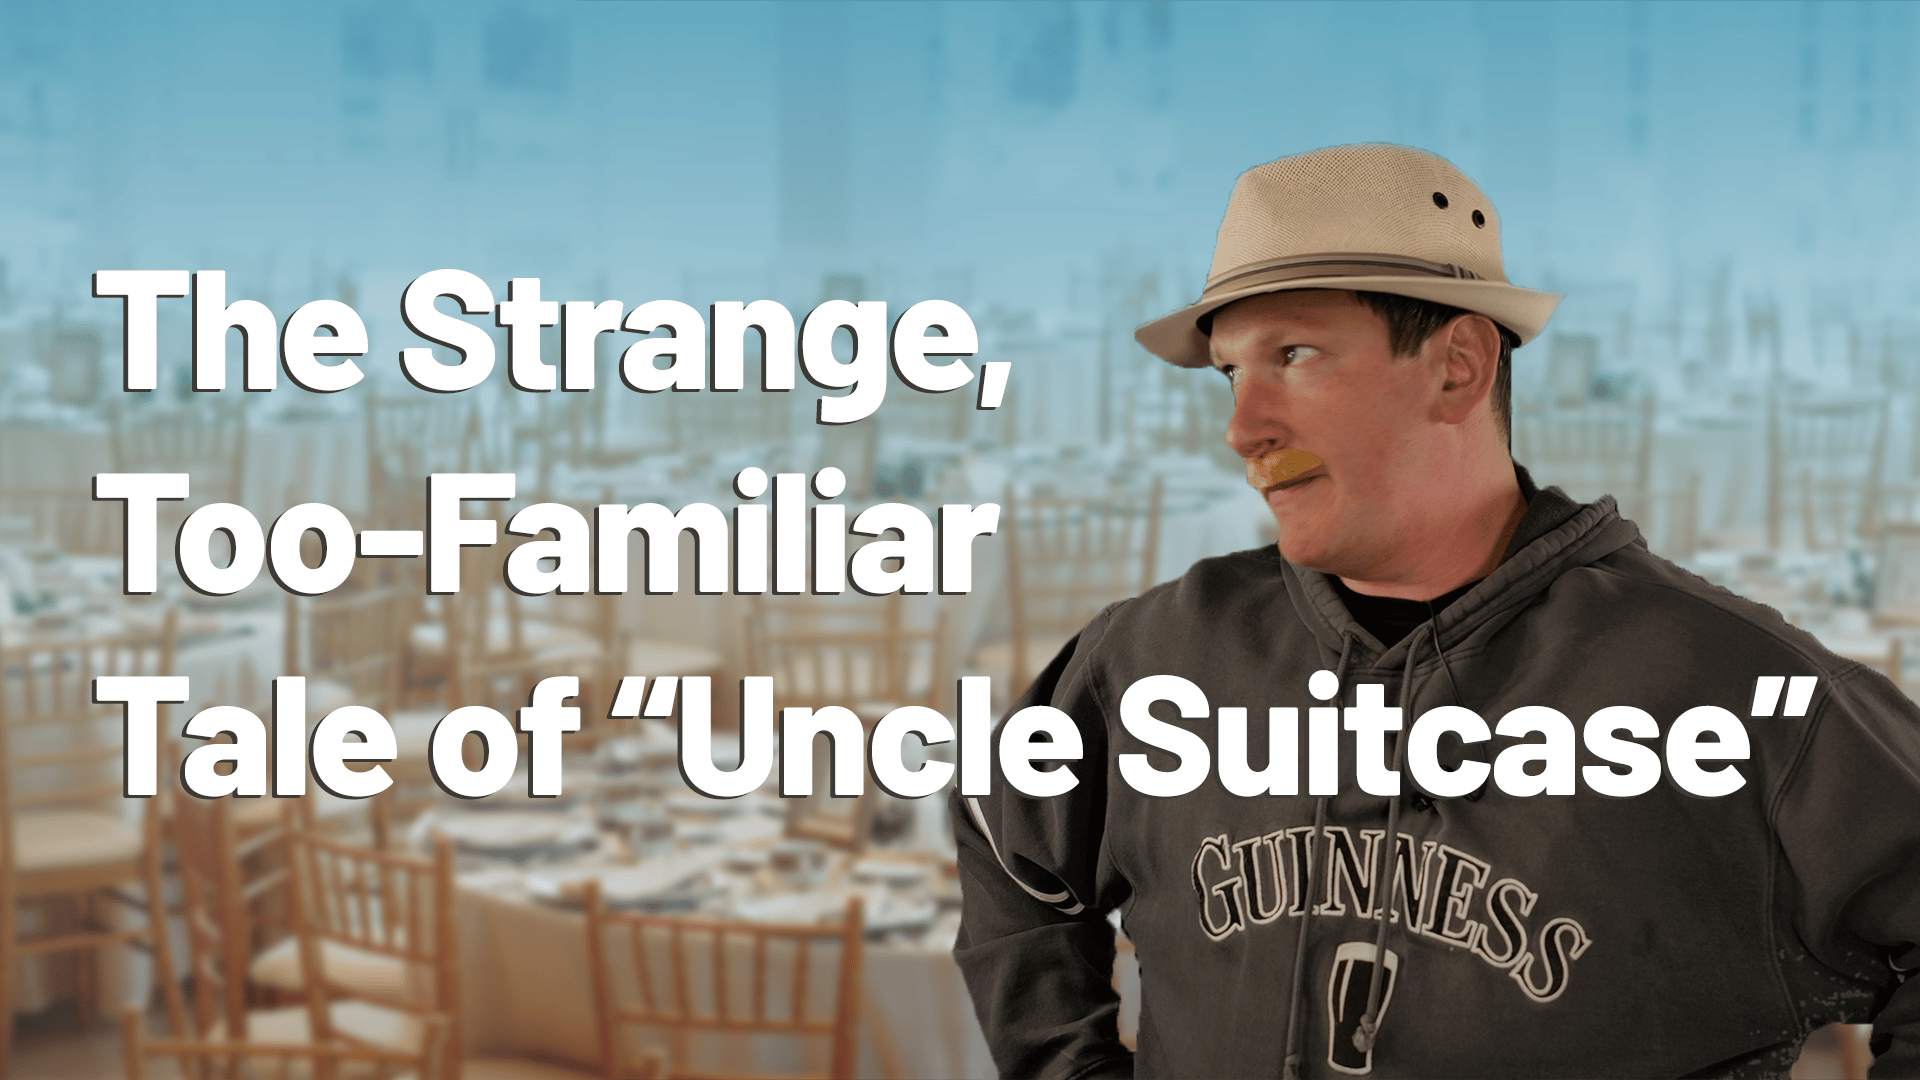 The Strange, All Too Familiar Tale of "Uncle Suitcase"